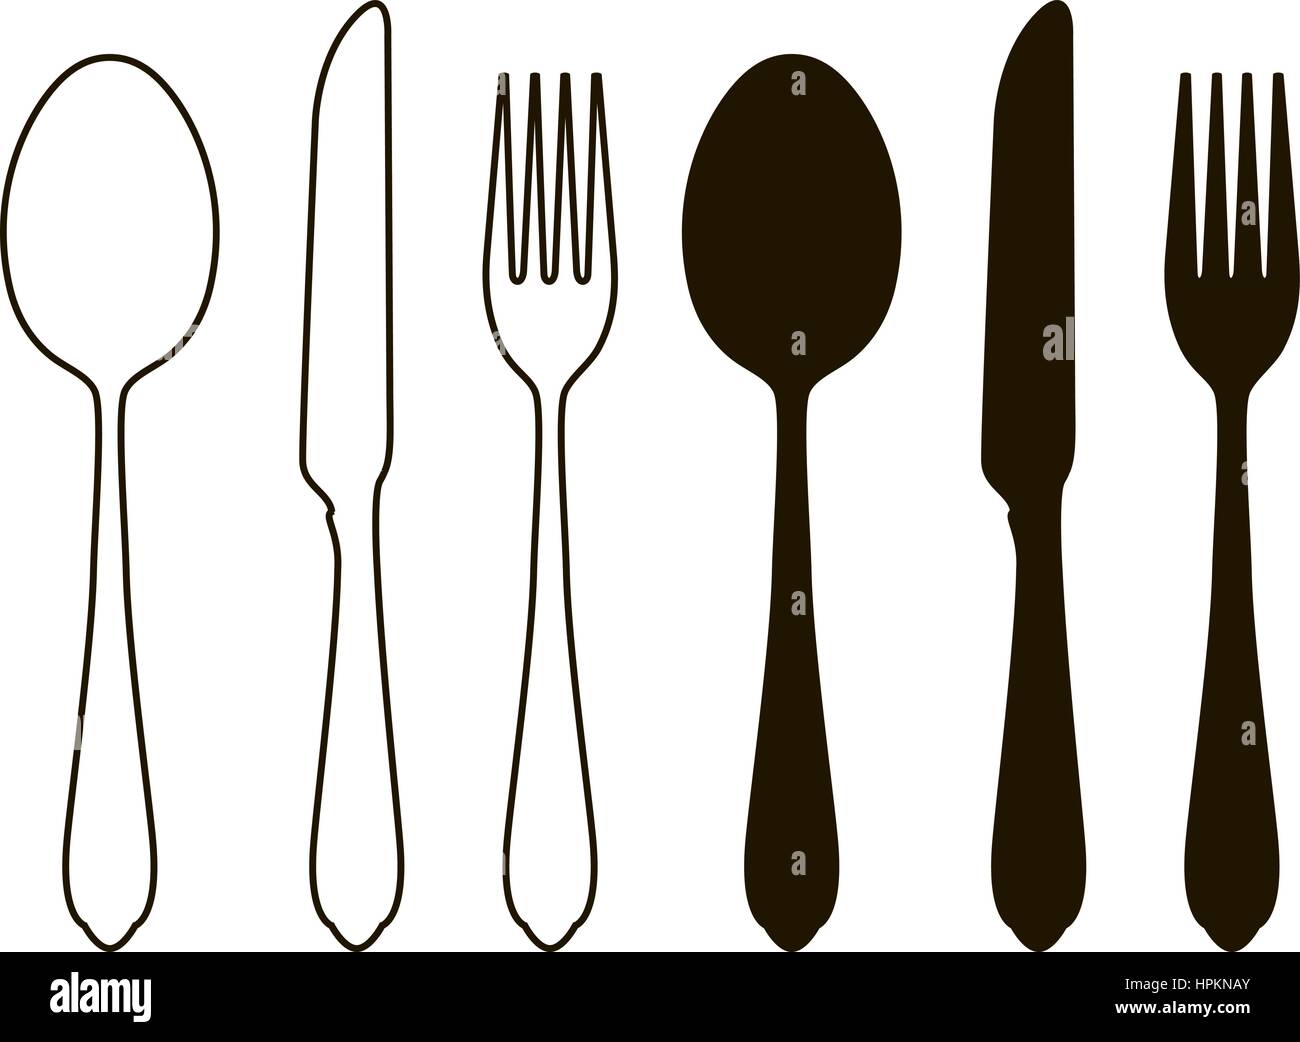 Table setting, tableware. Cutlery, set of fork, spoon and knife. Silhouette vector illustration Stock Vector